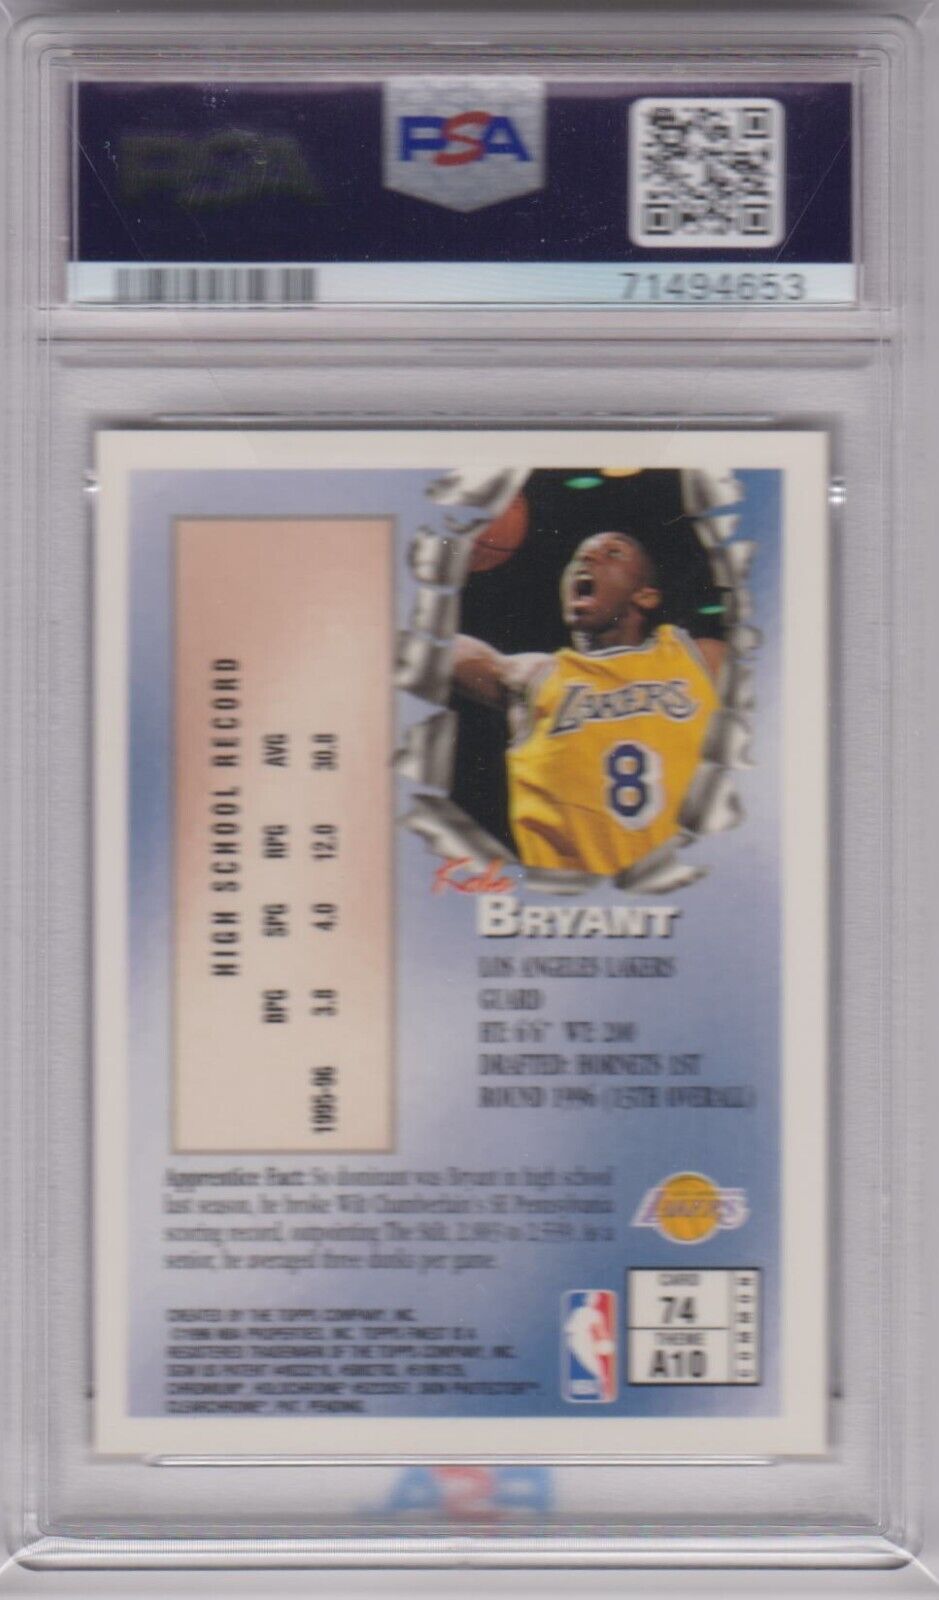 KOBE BRYANT 1996-97 Topps Finest RC Rookie w/coating #74  PSA 8 - LAKERS